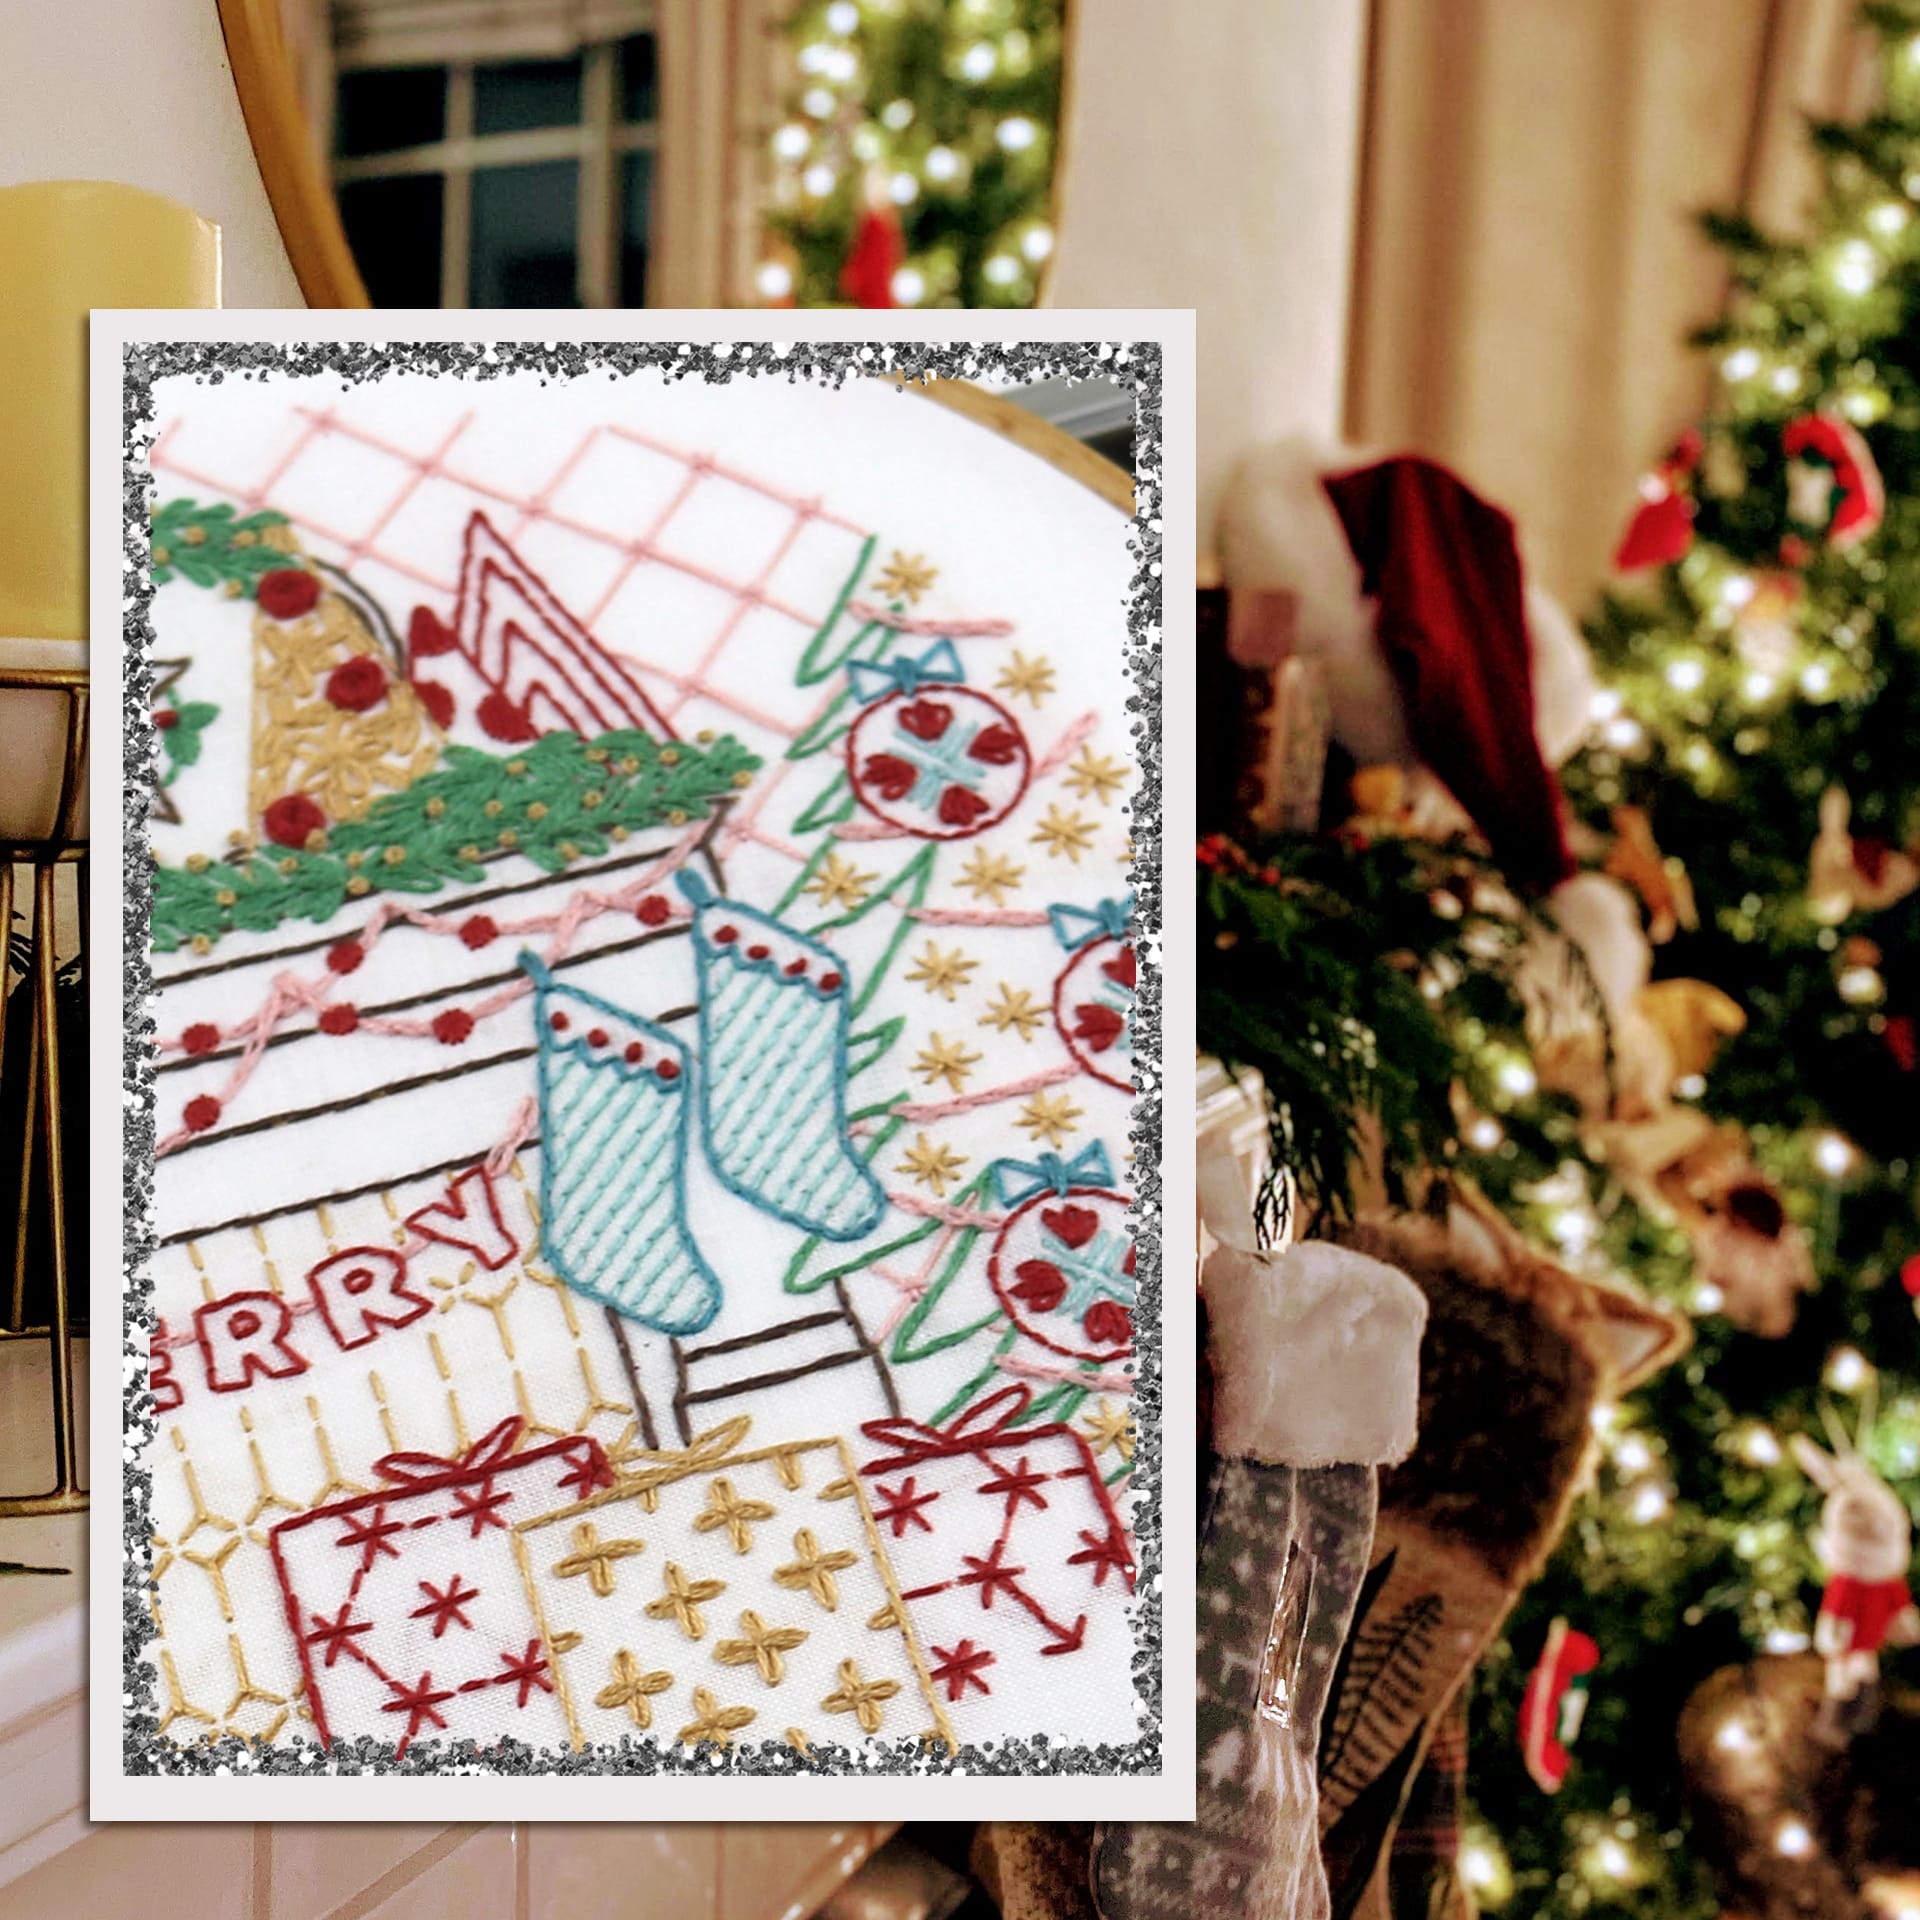 embroidered holiday scene with mantle, stockings and gifts inspired by the night before christmas